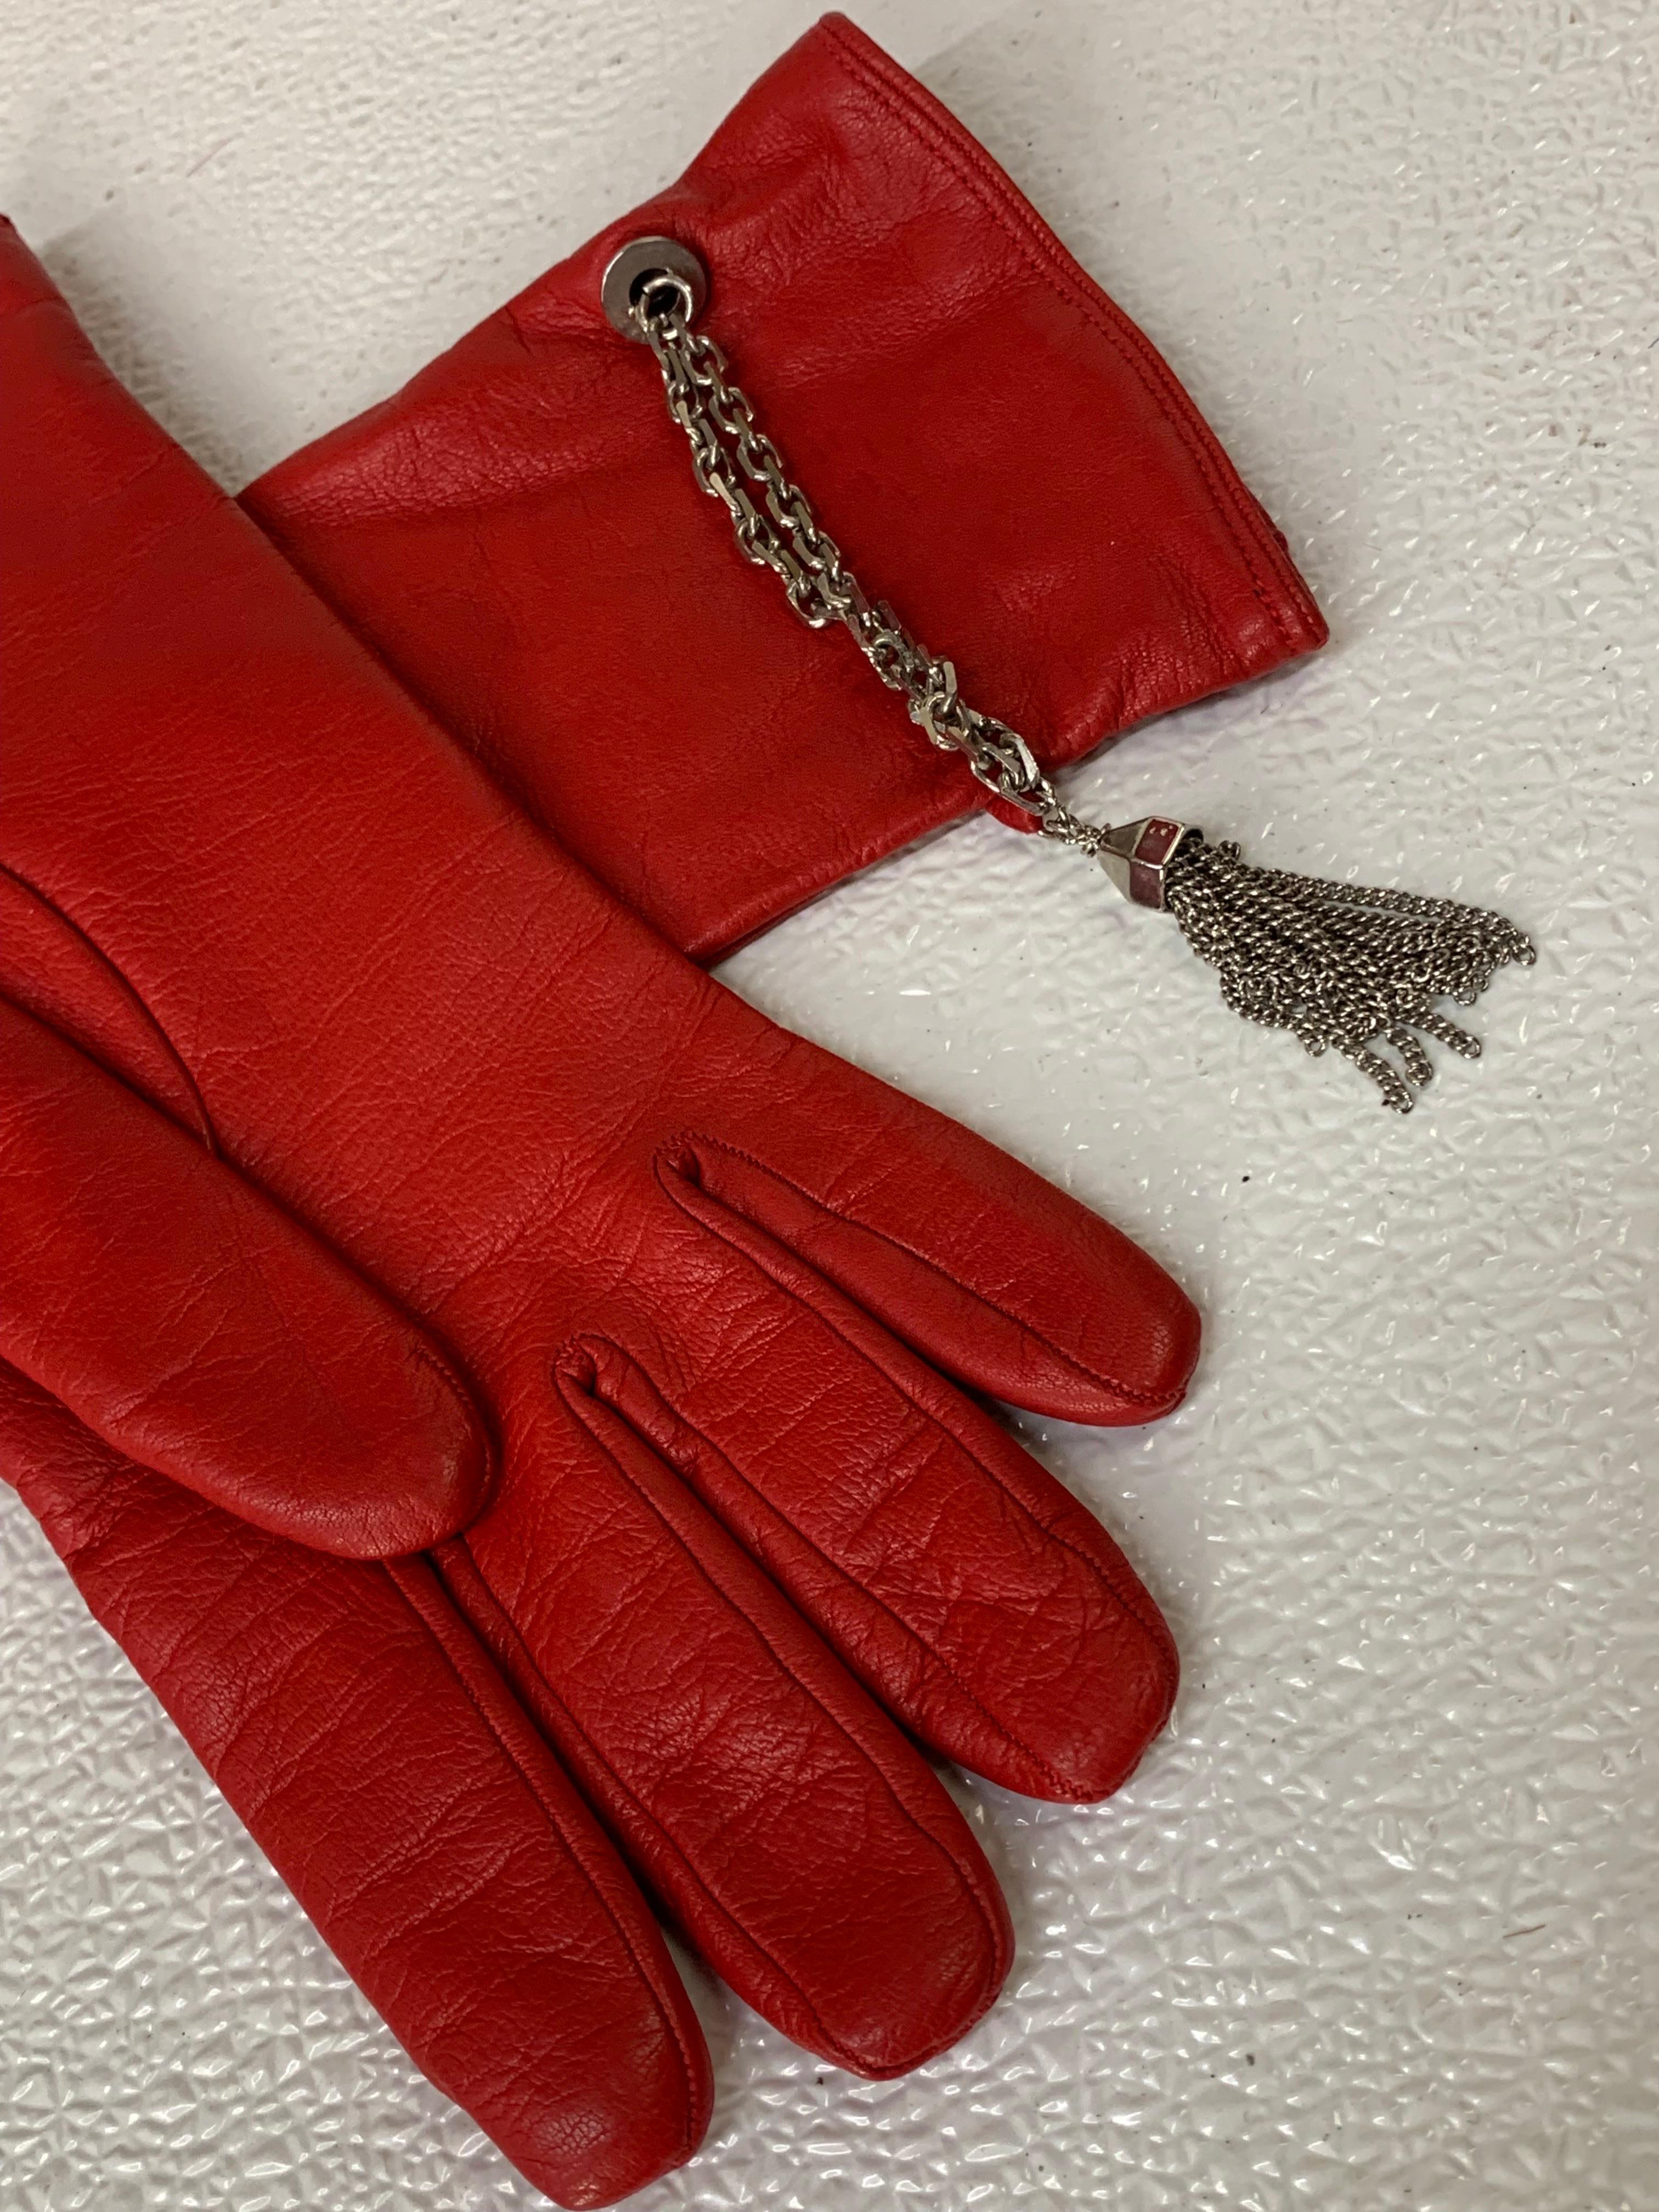 1980s Gianni Versace Red Kid Leather Gloves w Cashmere Lining & Tassel Chain  In New Condition For Sale In Gresham, OR